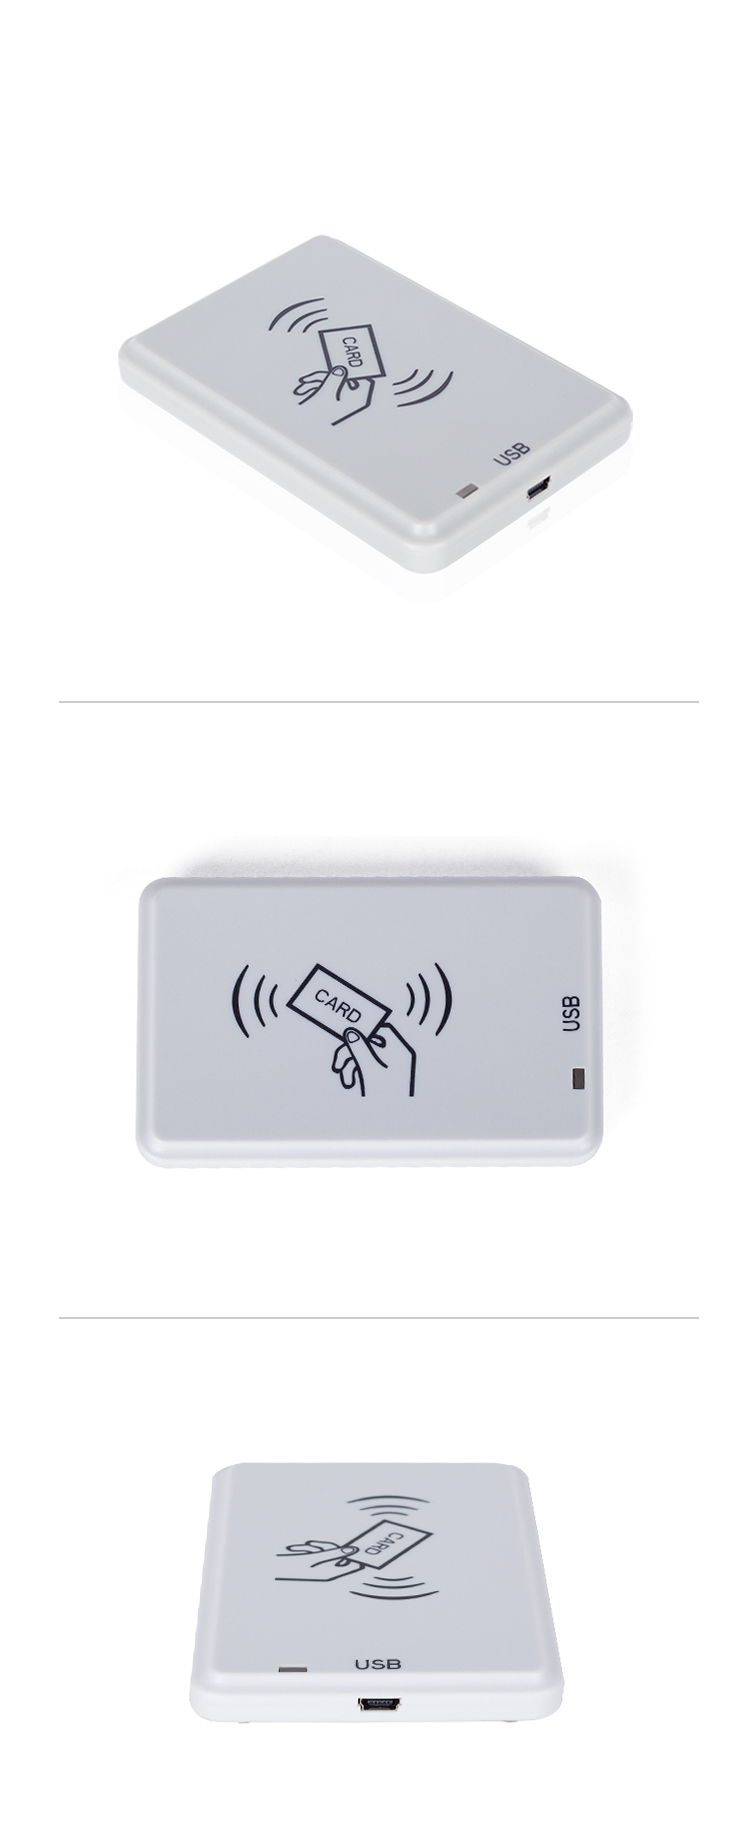 White HF USB RFID Reader For Passive RFID Tags Support Anti - Collision Algorithm